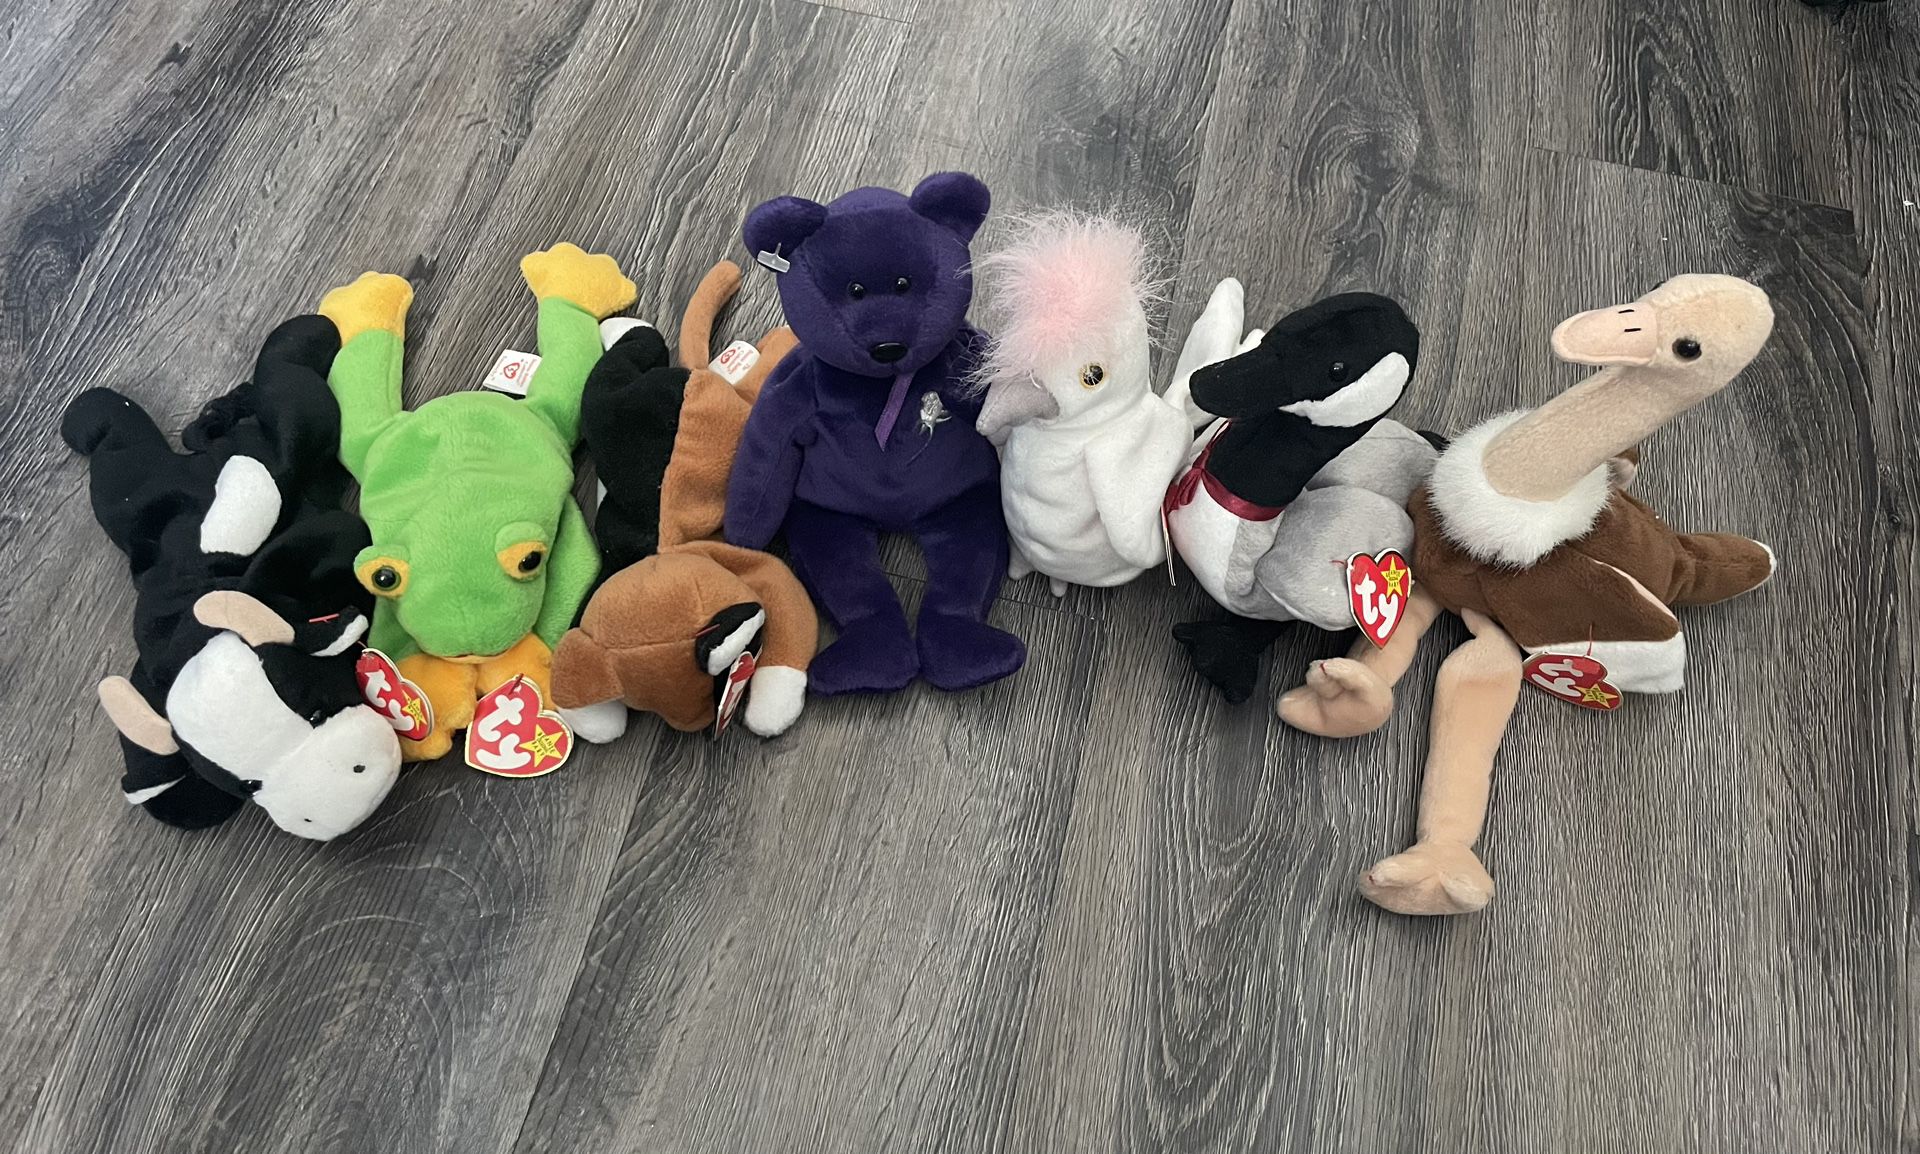 7 Vintage Beanie Babies Lot With Tags TY